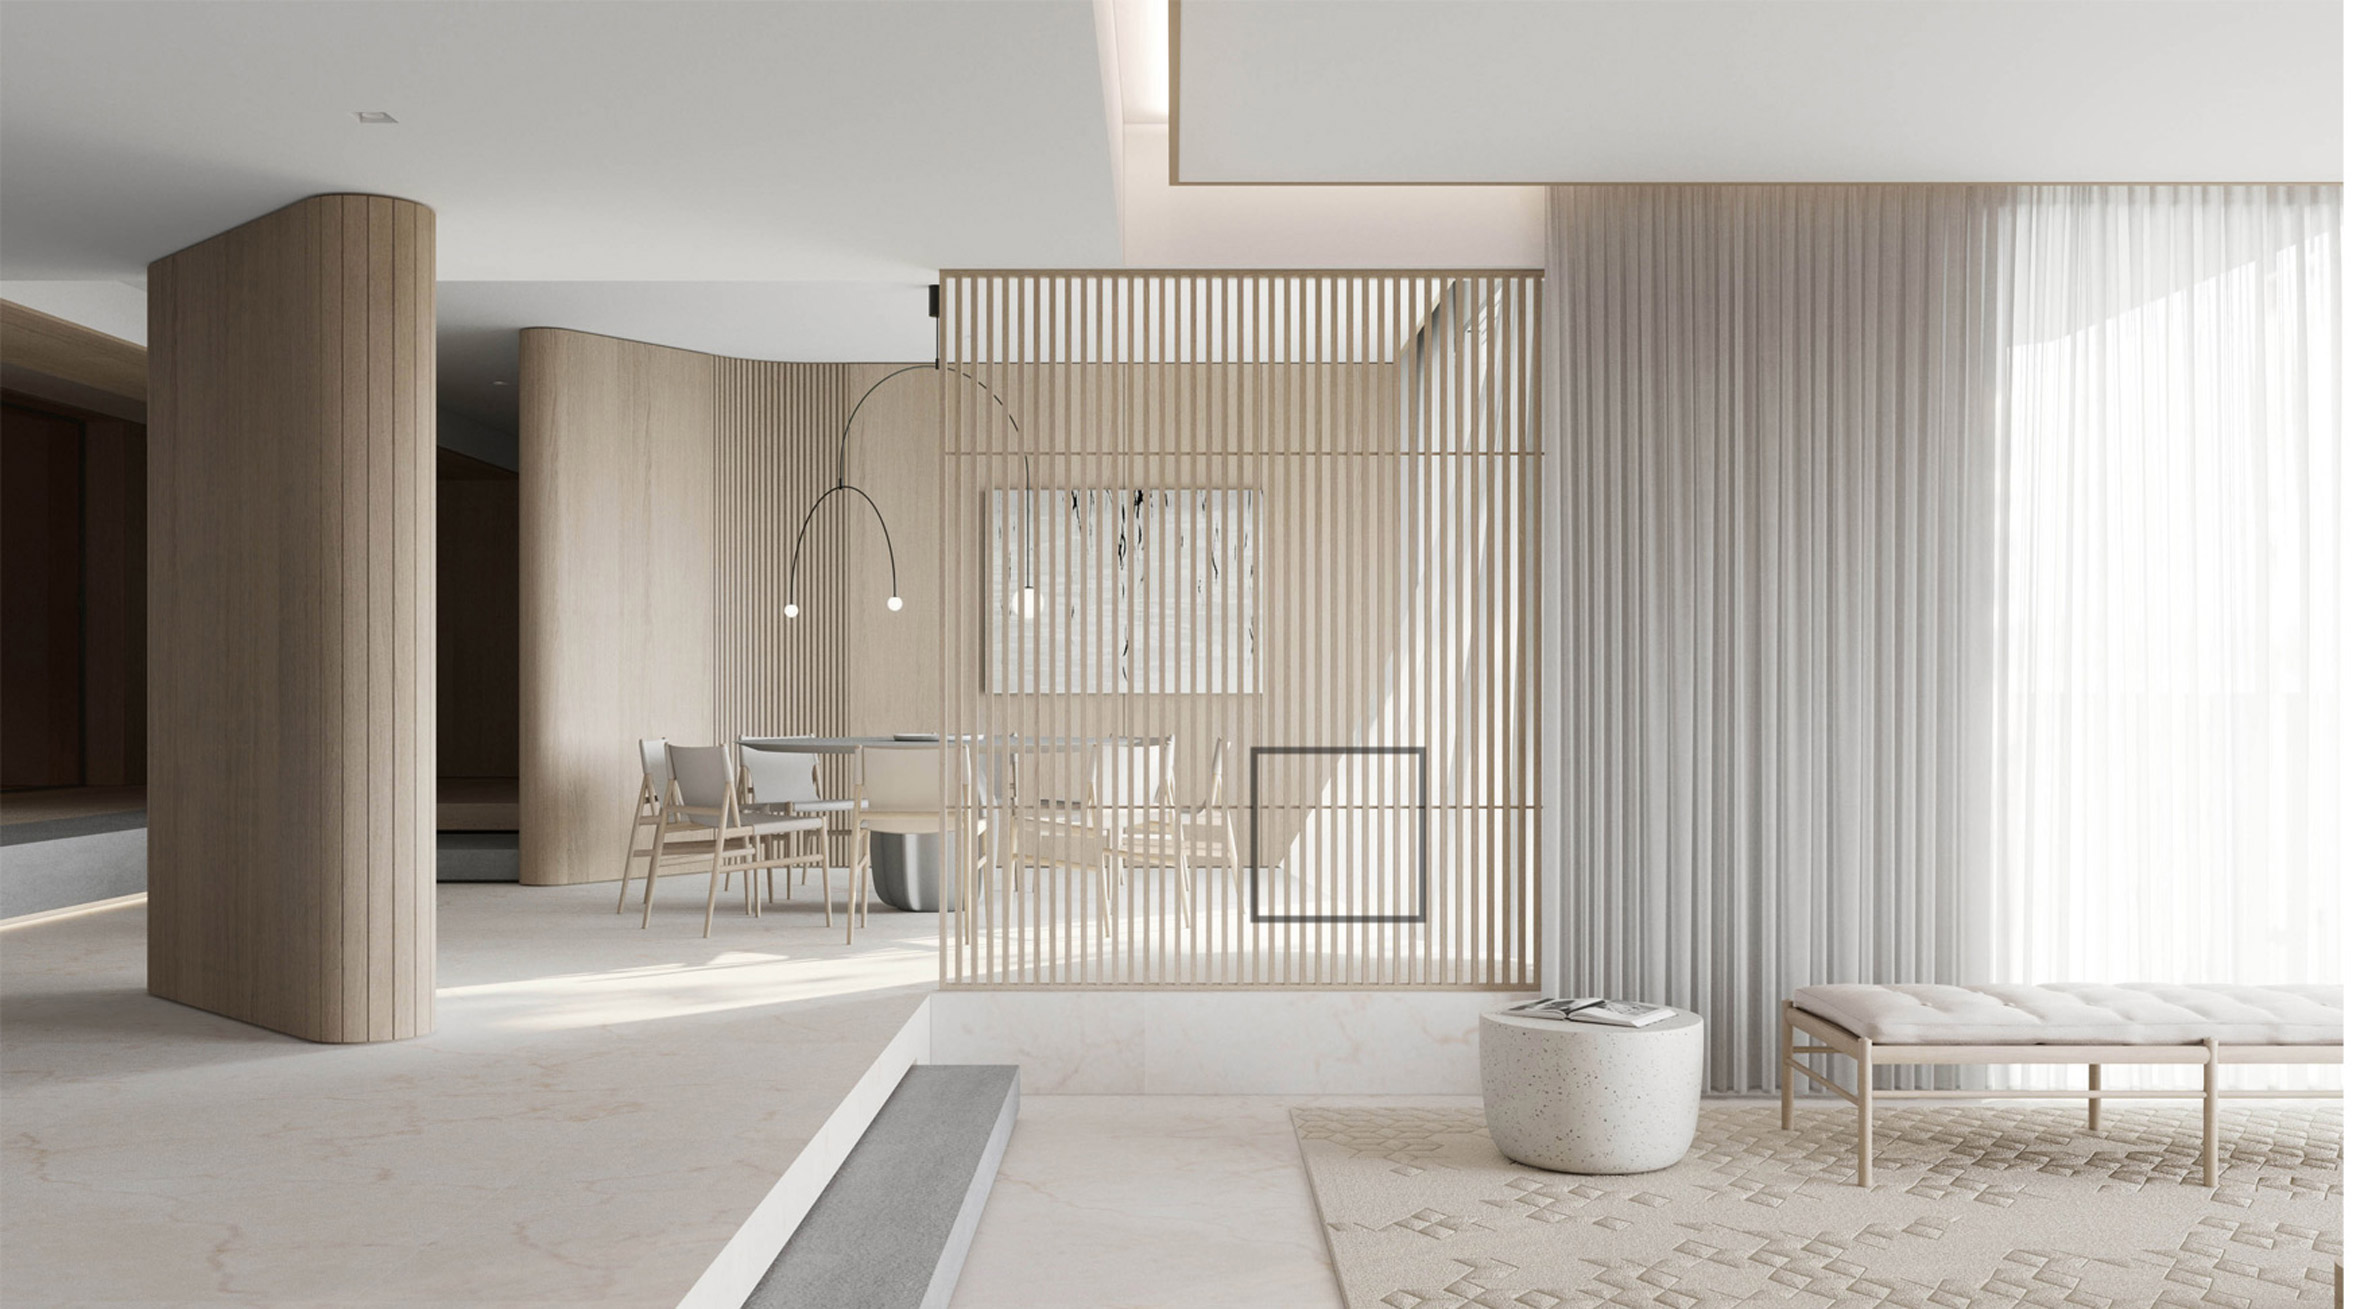 Interior shortlisted for Dezeen Awards disqualified: Nassim Mansion by 0932 Design Consultants